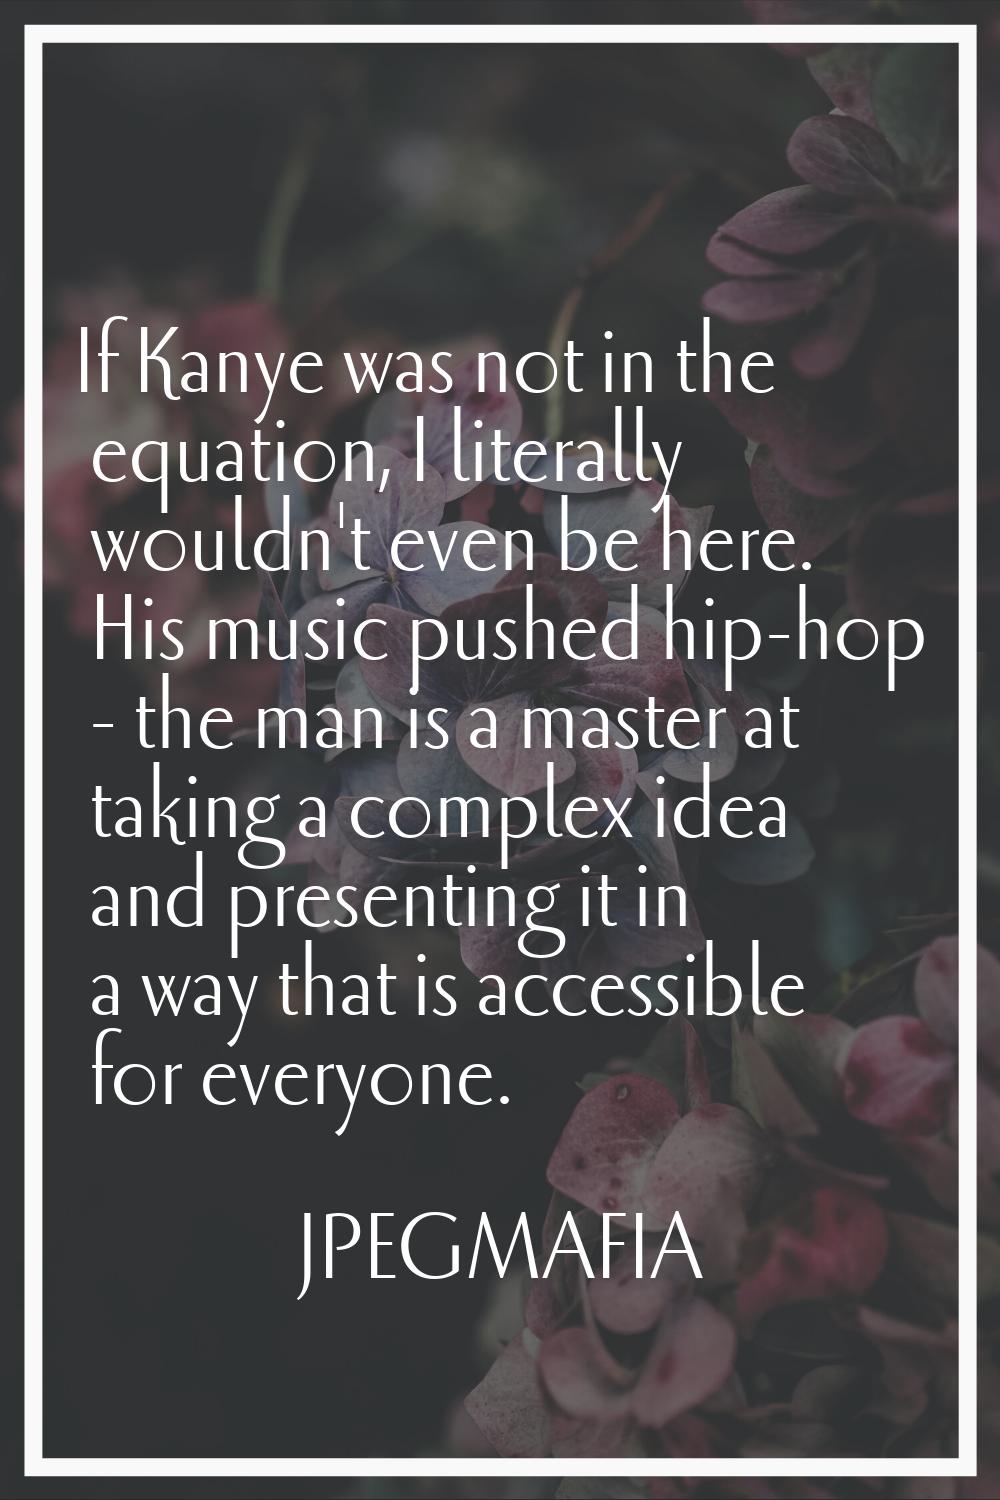 If Kanye was not in the equation, I literally wouldn't even be here. His music pushed hip-hop - the